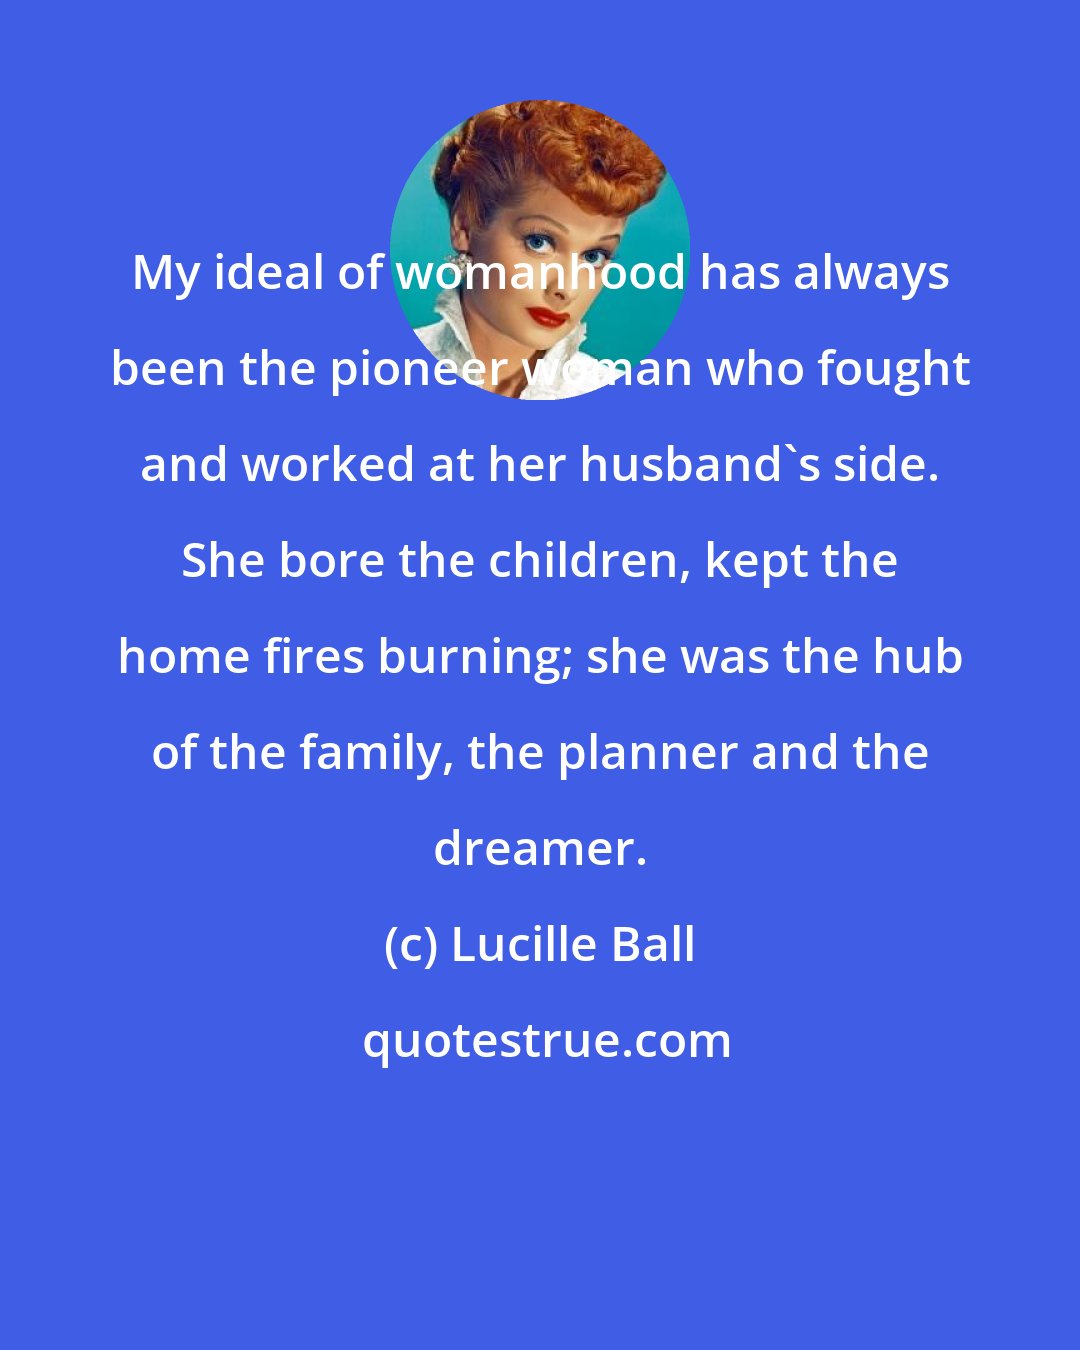 Lucille Ball: My ideal of womanhood has always been the pioneer woman who fought and worked at her husband's side. She bore the children, kept the home fires burning; she was the hub of the family, the planner and the dreamer.